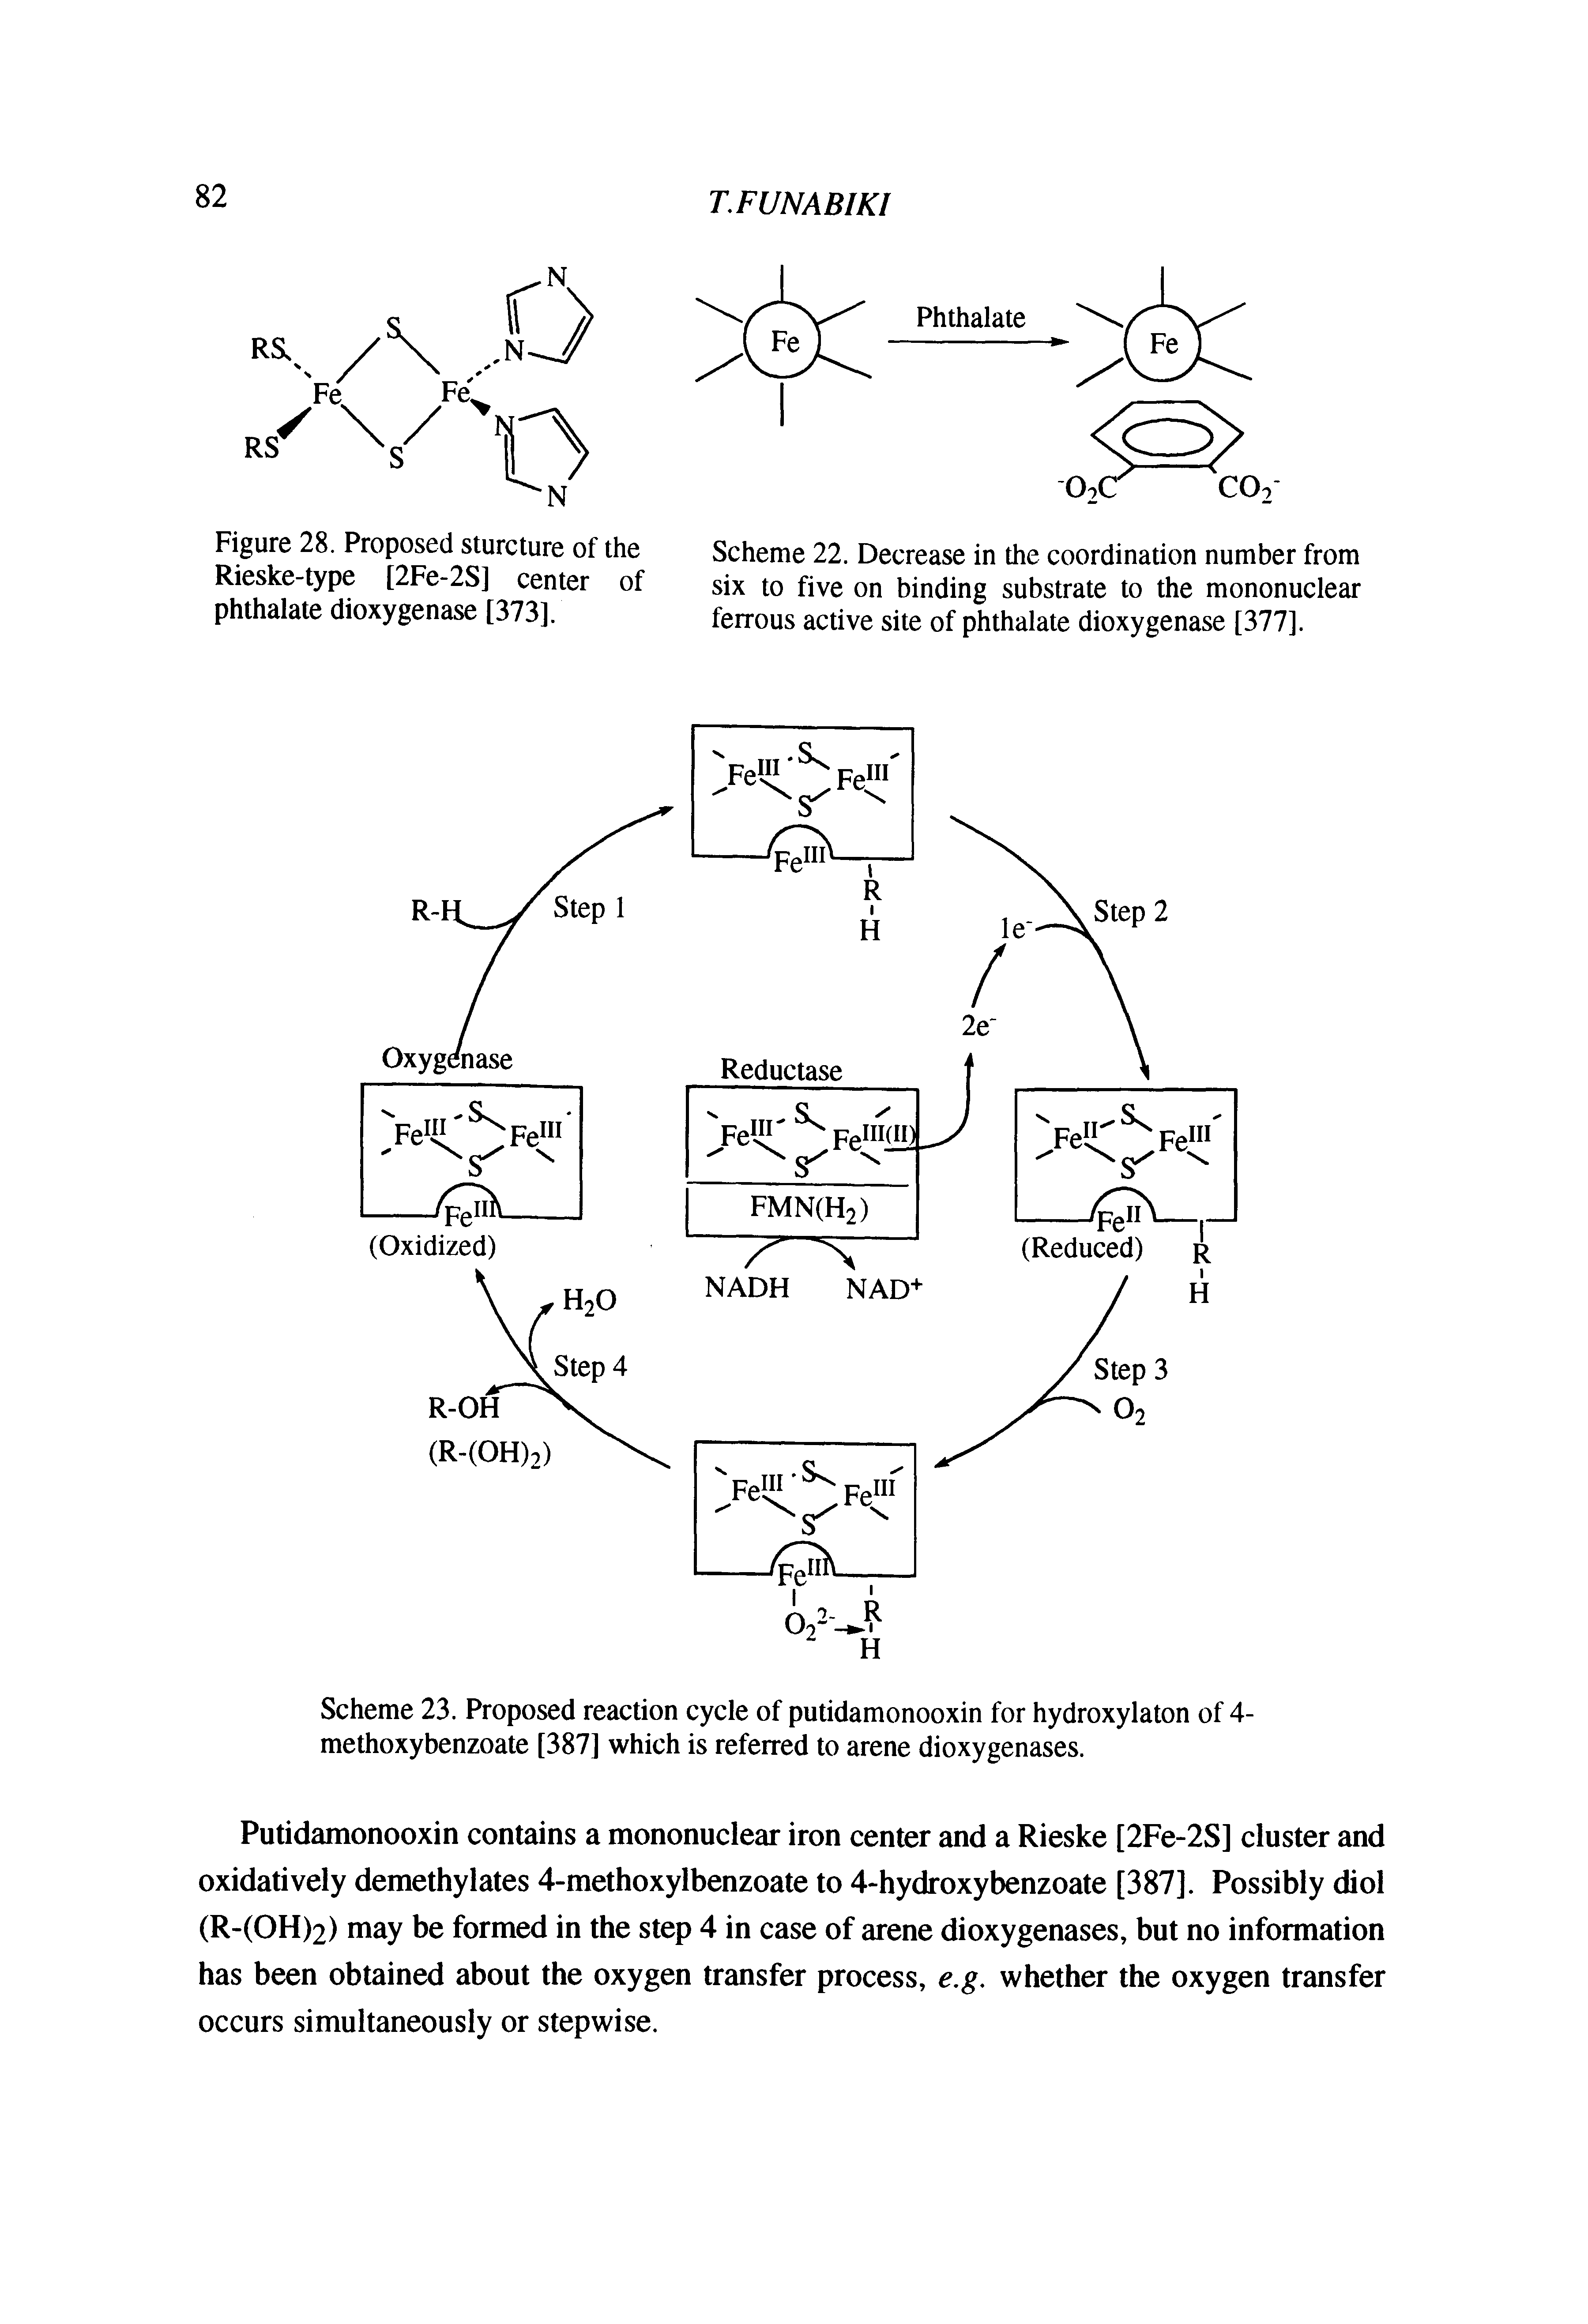 Scheme 23. Proposed reaction cycle of putidamonooxin for hydroxylaton of 4-methoxybenzoate [387] which is referred to arene dioxygenases.